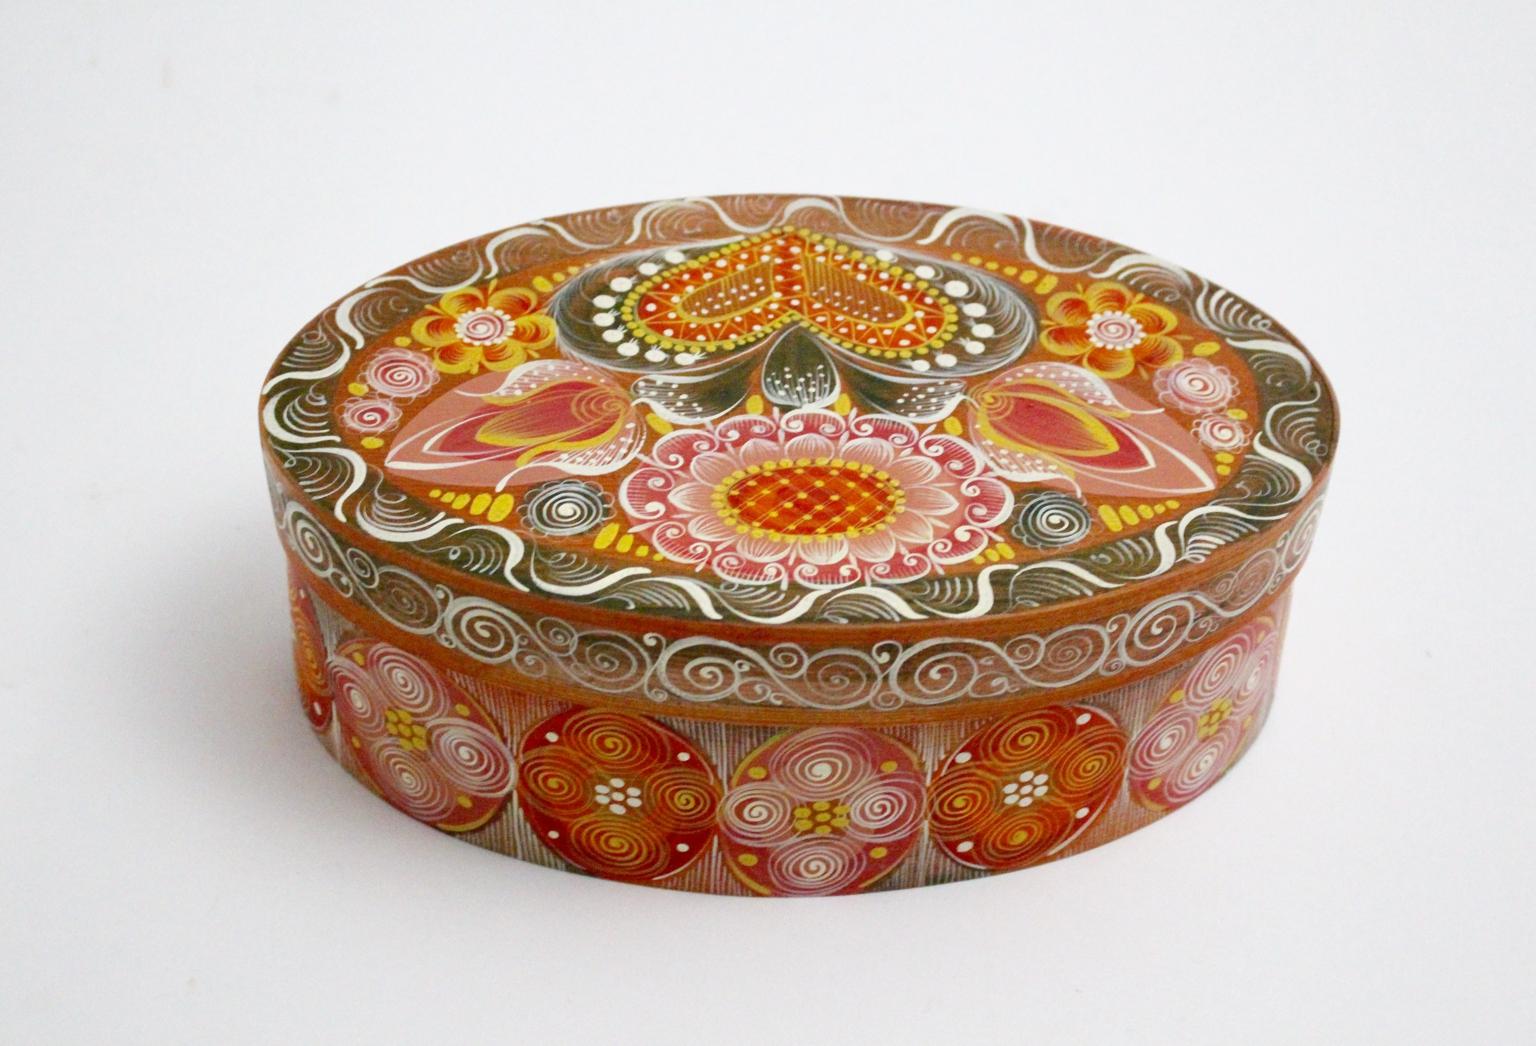 Folk Art splint box shows multicolored hand painted rural decor like flowers and hearts.
It was designed and made in the 1950s, Austria.
The oval shaped box features a base part and a lid.
The condition is very good.
approx. measures: Length: 24